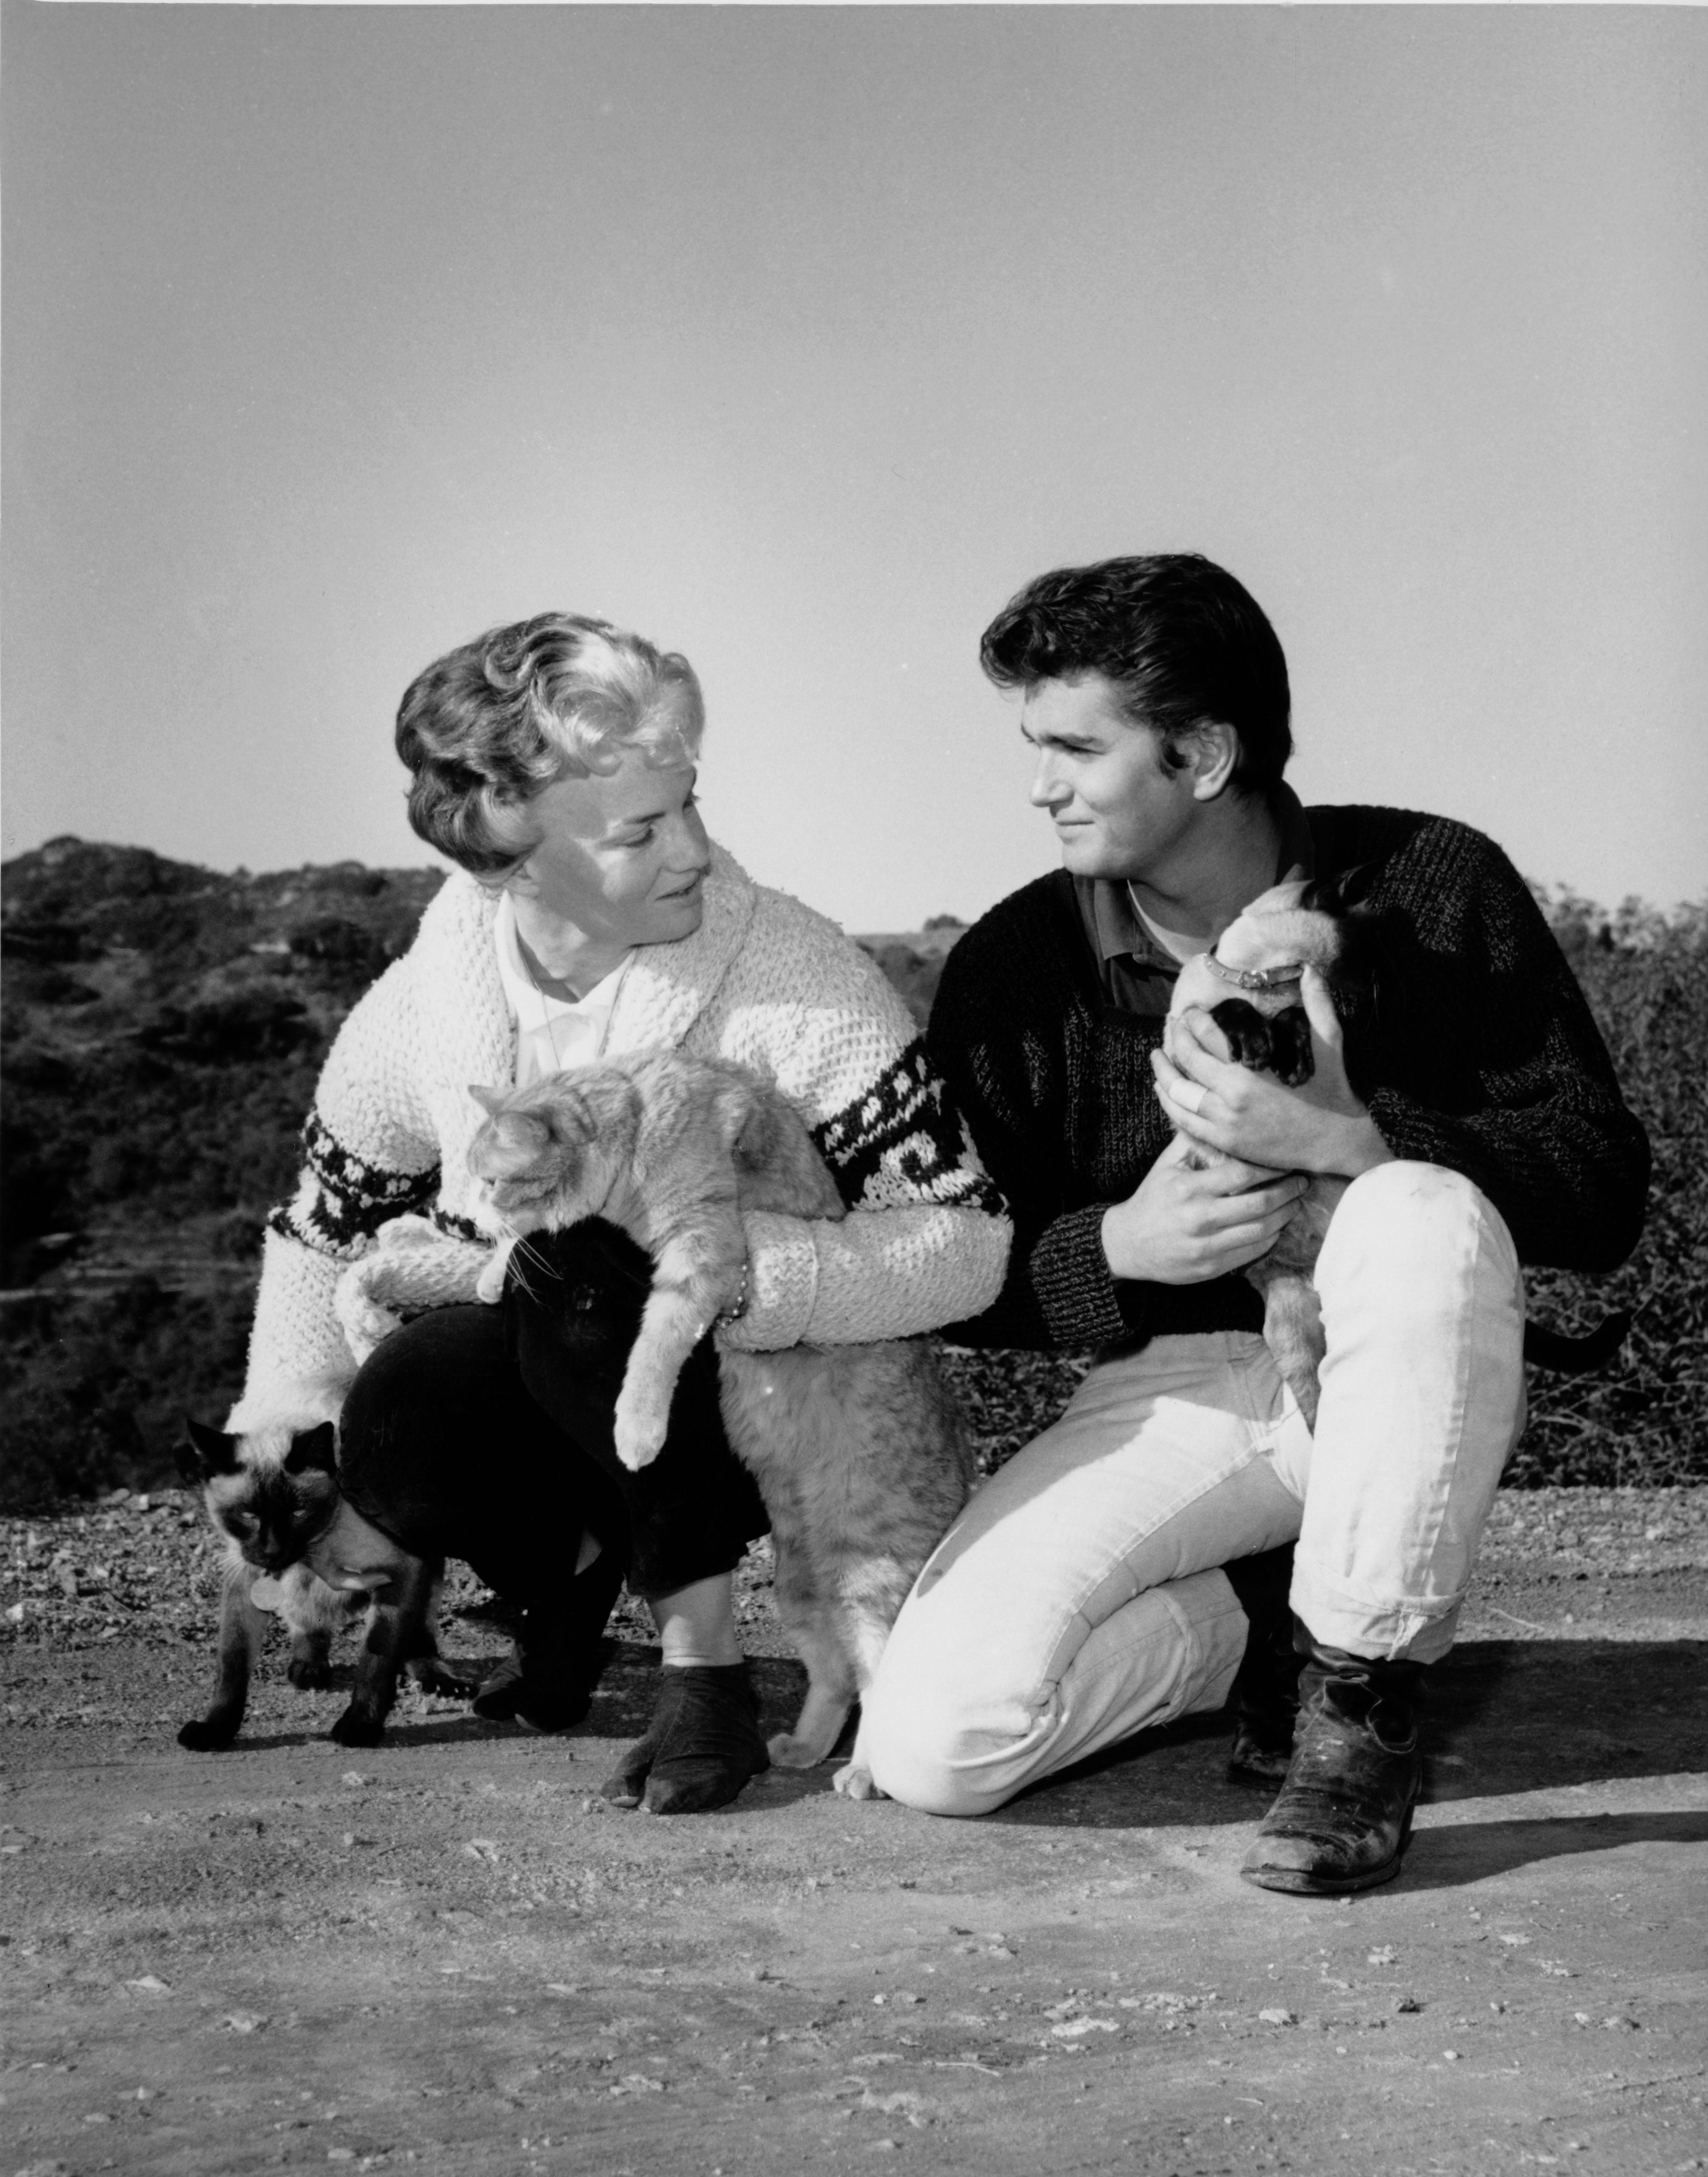 Dodie Levy-Fraser posing at home with Michael Landon and their cats, circa 1960. | Source: Archive Photos/Getty Images